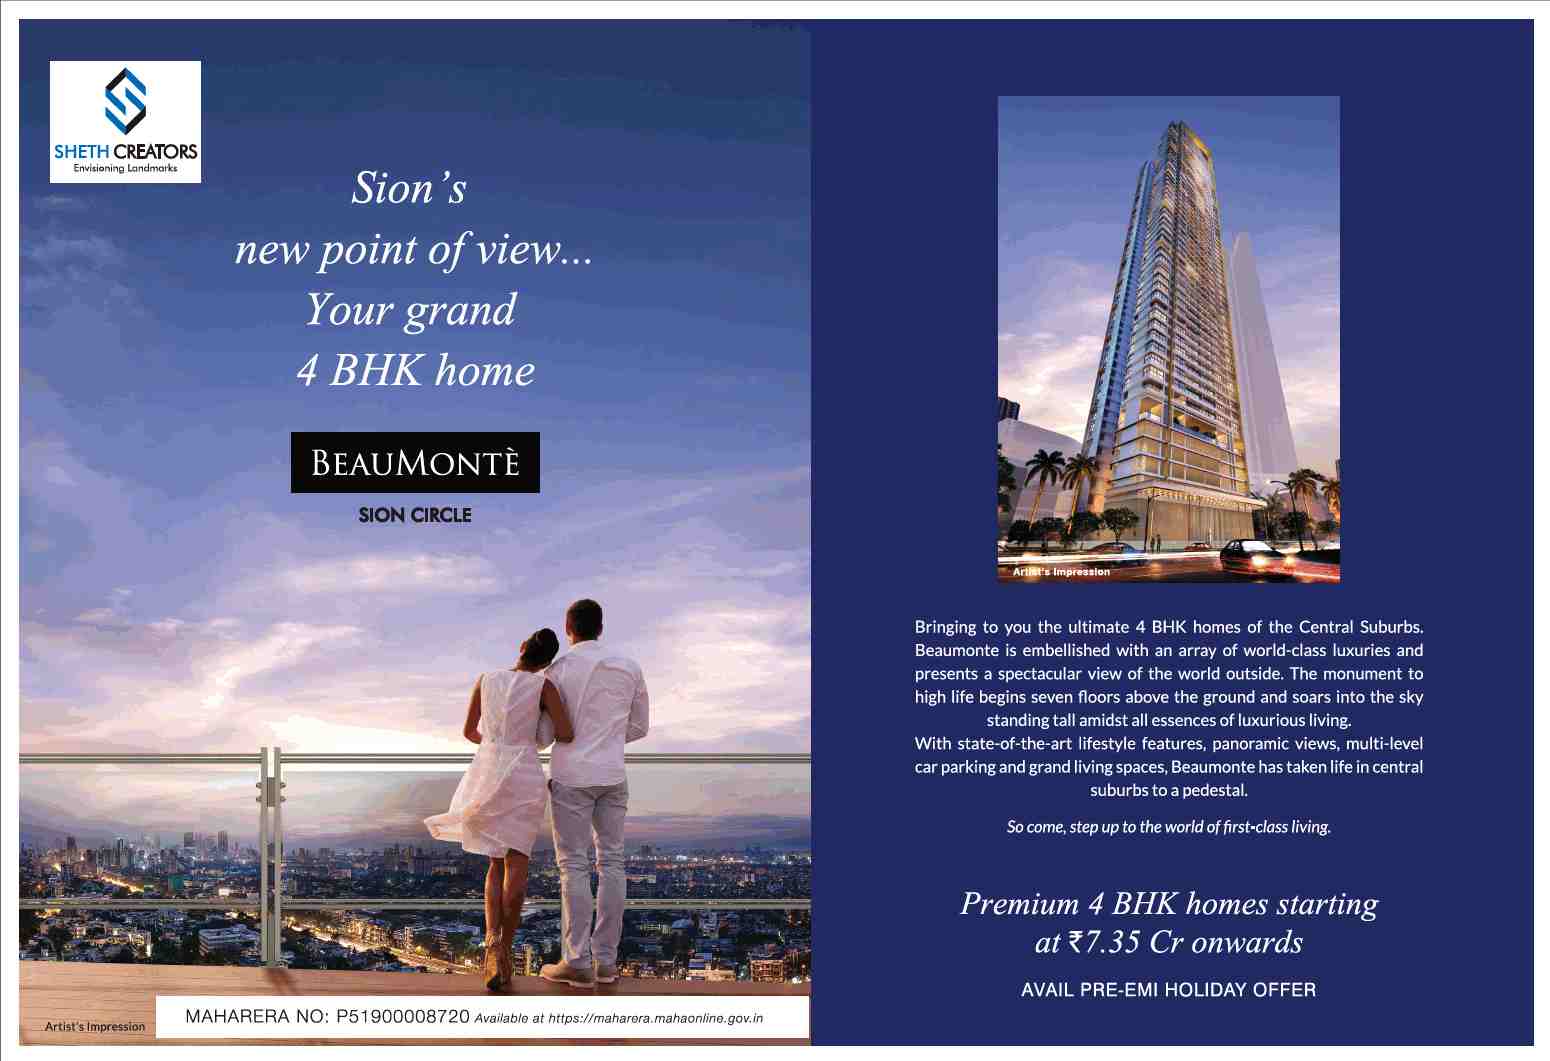 Step up to the world of the first-class living at Sheth Beaumonte in Mumbai Update